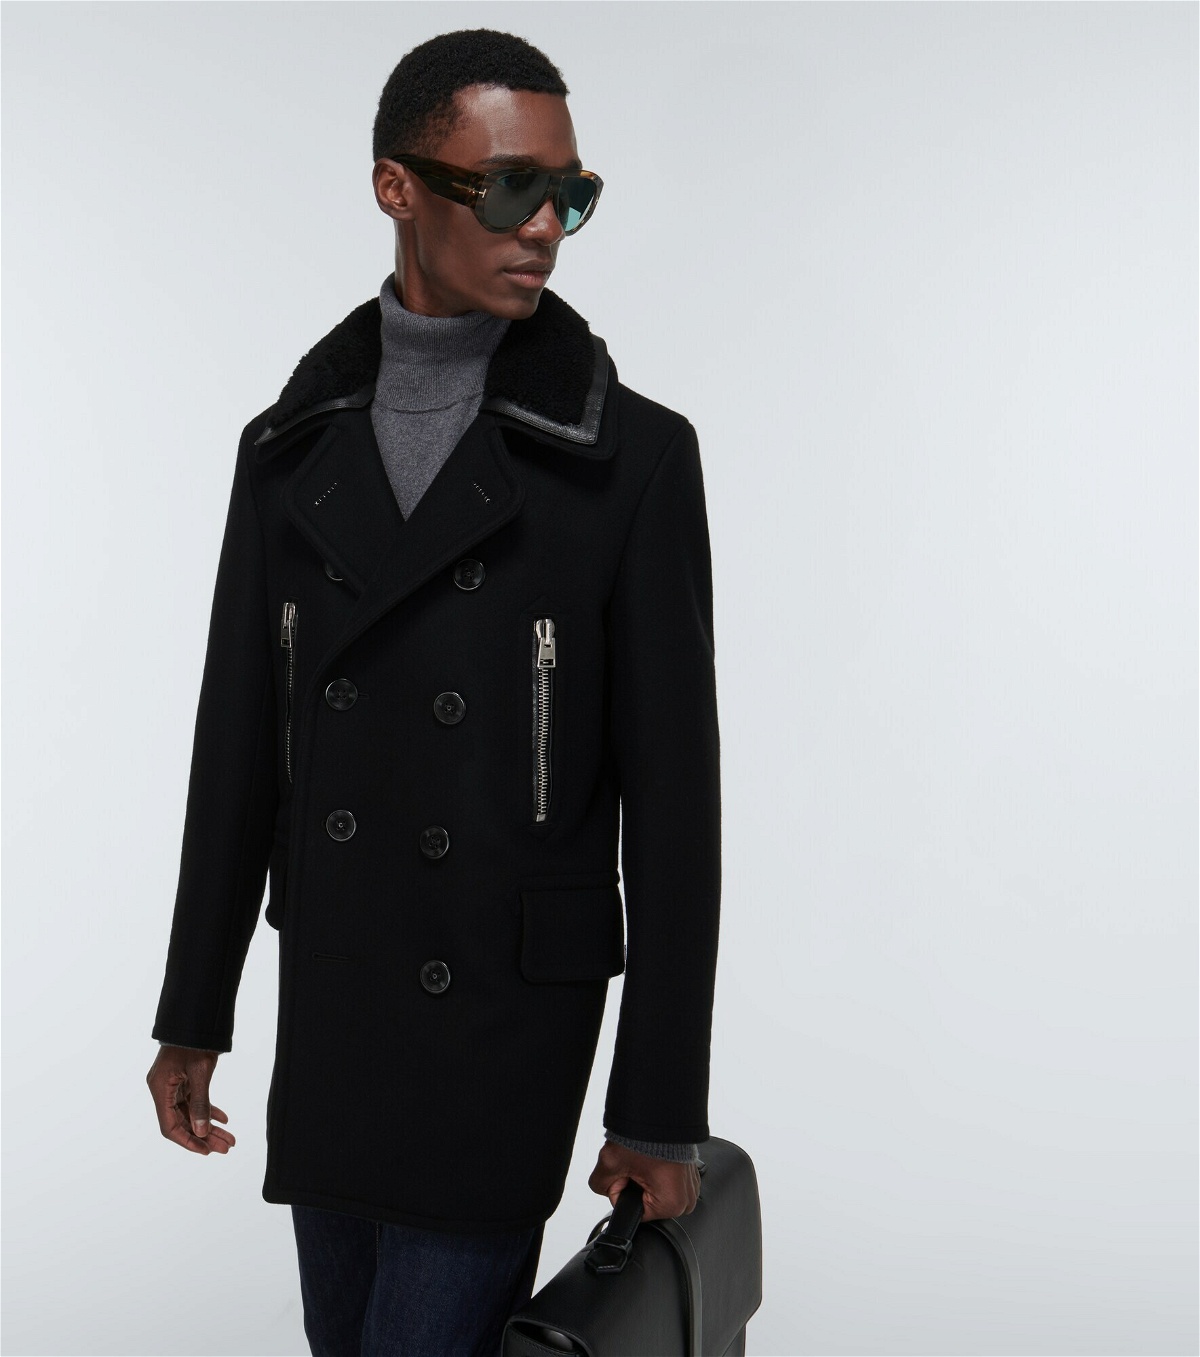 Tom Ford - Faux shearling-trimmed peacoat TOM FORD